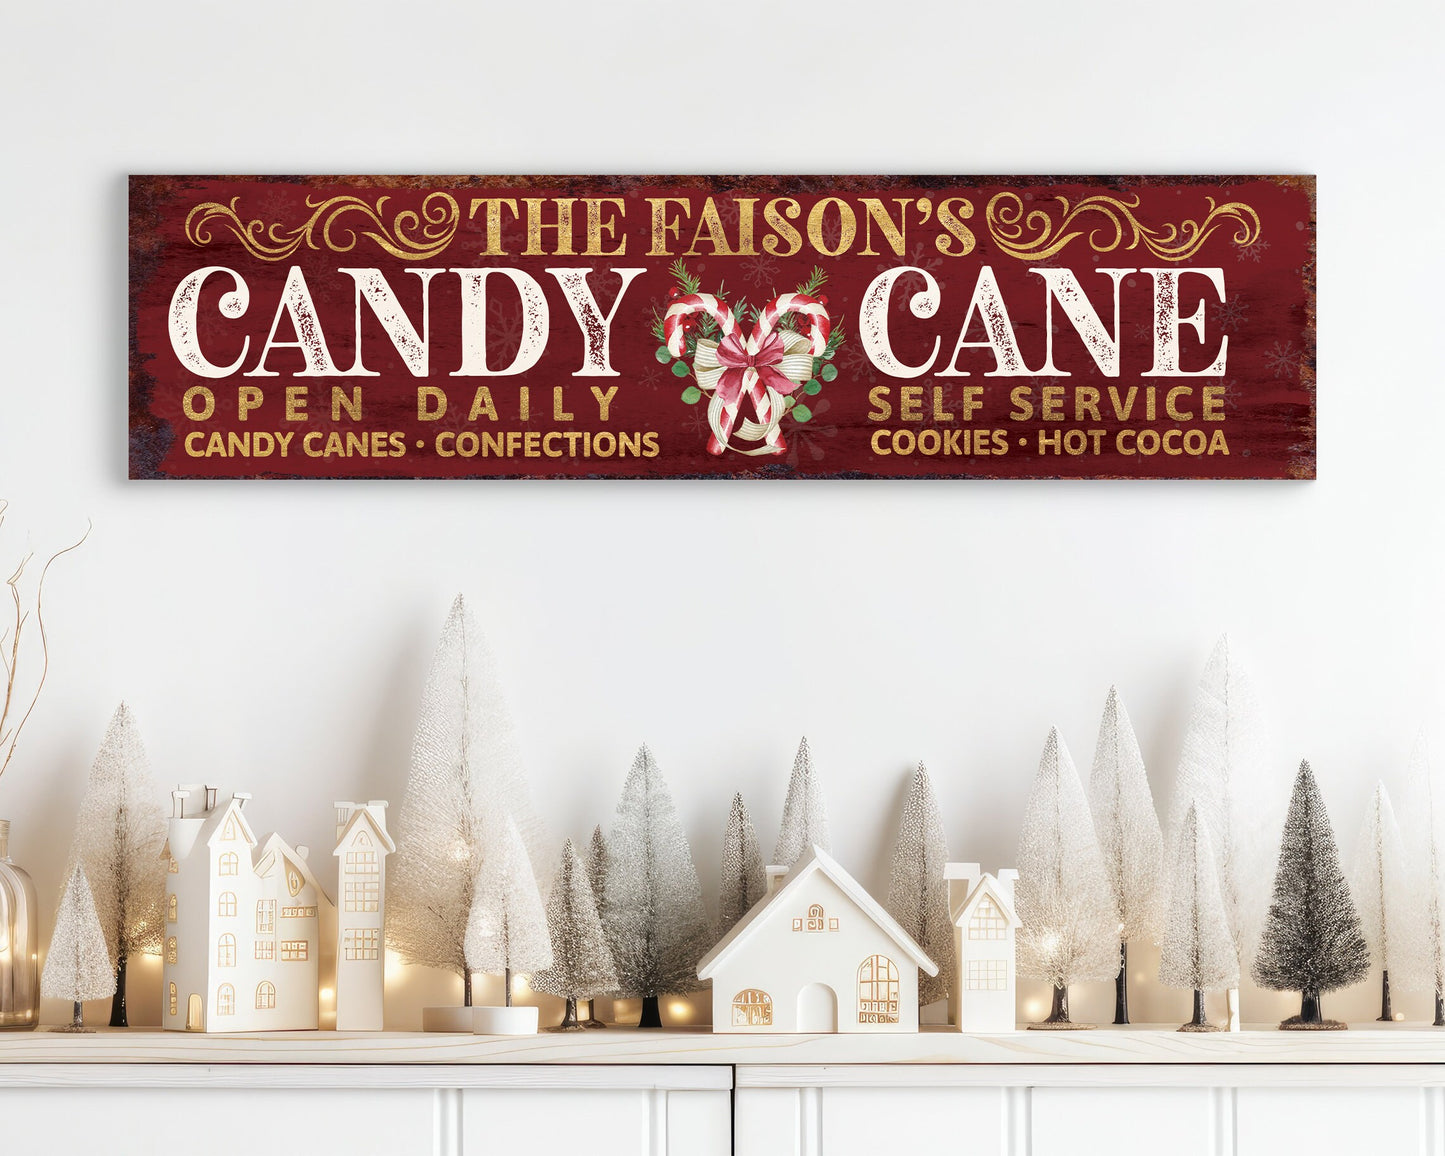 36in Personalized Candy Cane Sign - Rustic Christmas Decor, Modern Farmhouse Vintage Holiday Art, Personalized Family Name